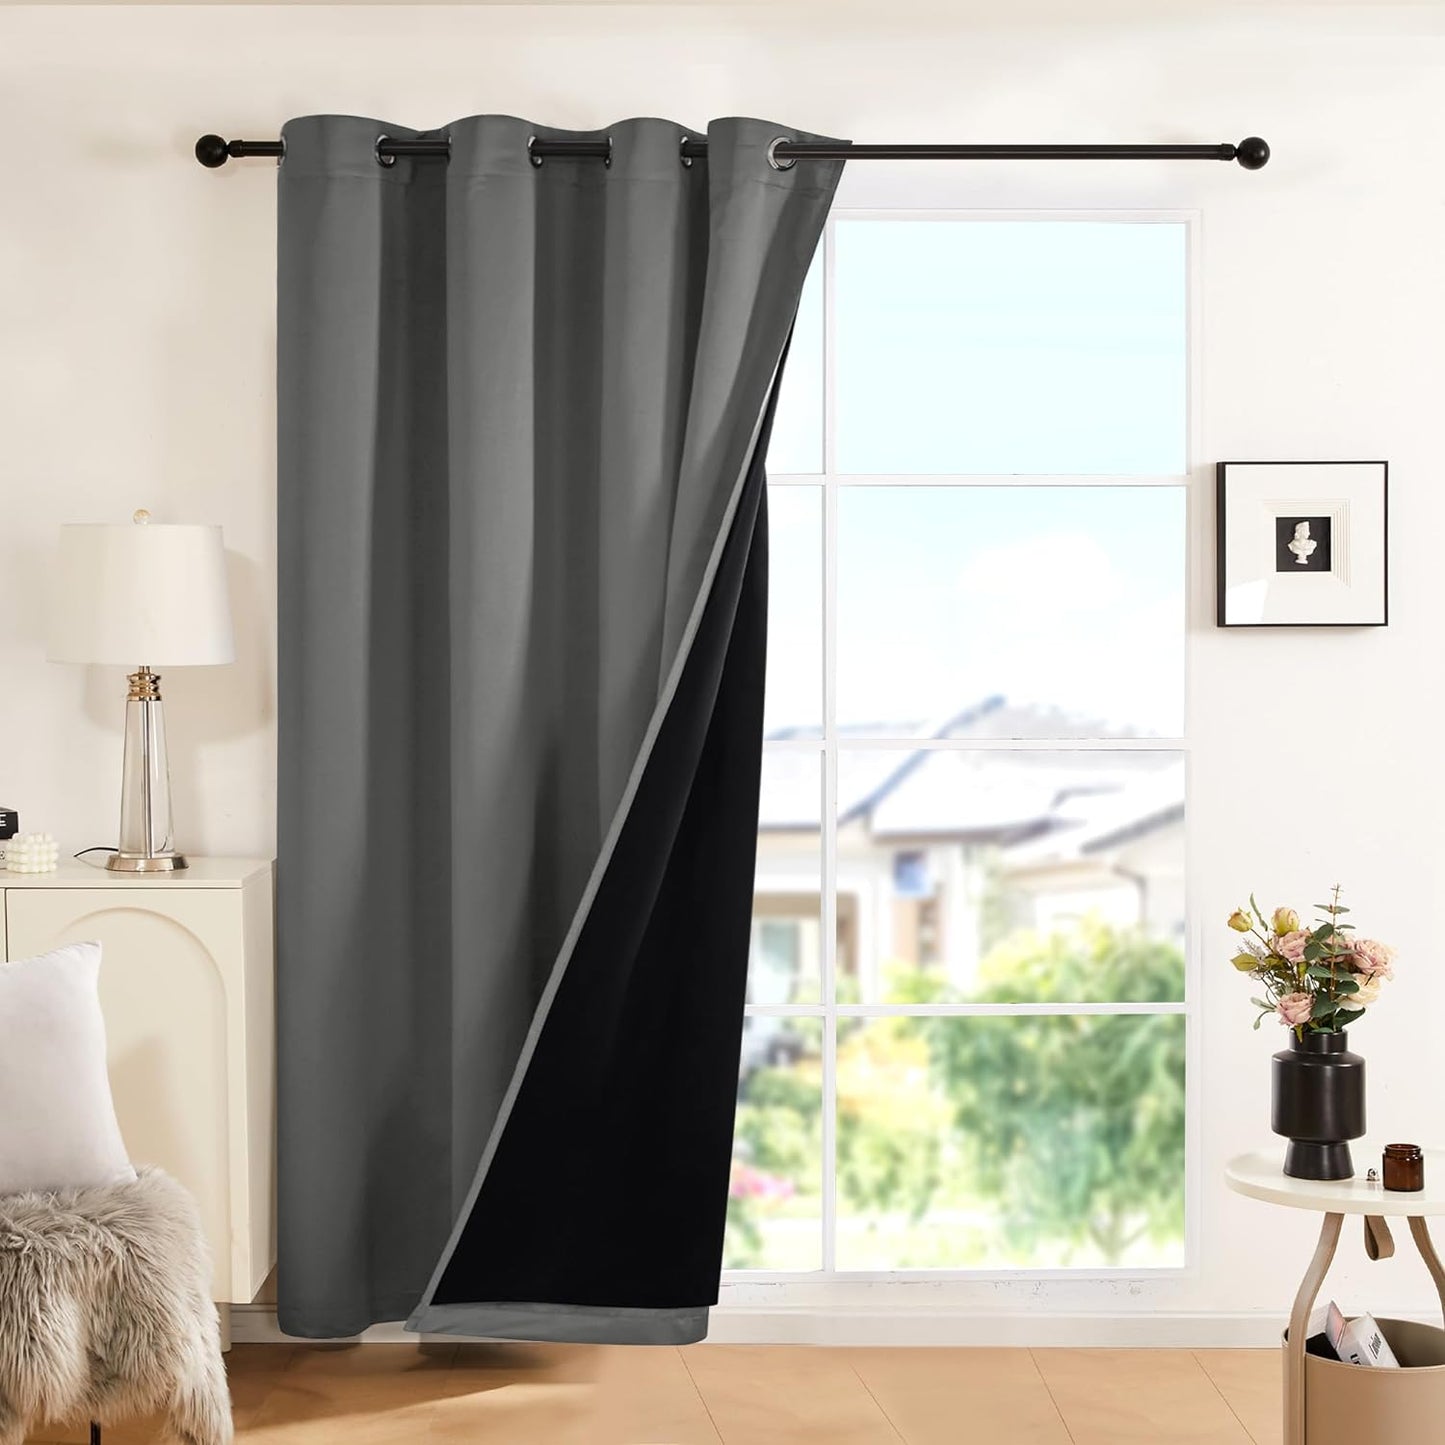 Deconovo 100% White Blackout Curtains, Double Layer Sliding Door Curtain for Living Room, Extra Wide Room Divder Curtains for Patio Door (100W X 84L Inches, Pure White, 1 Panel)  DECONOVO Dark Grey 52W X 84L Inch 